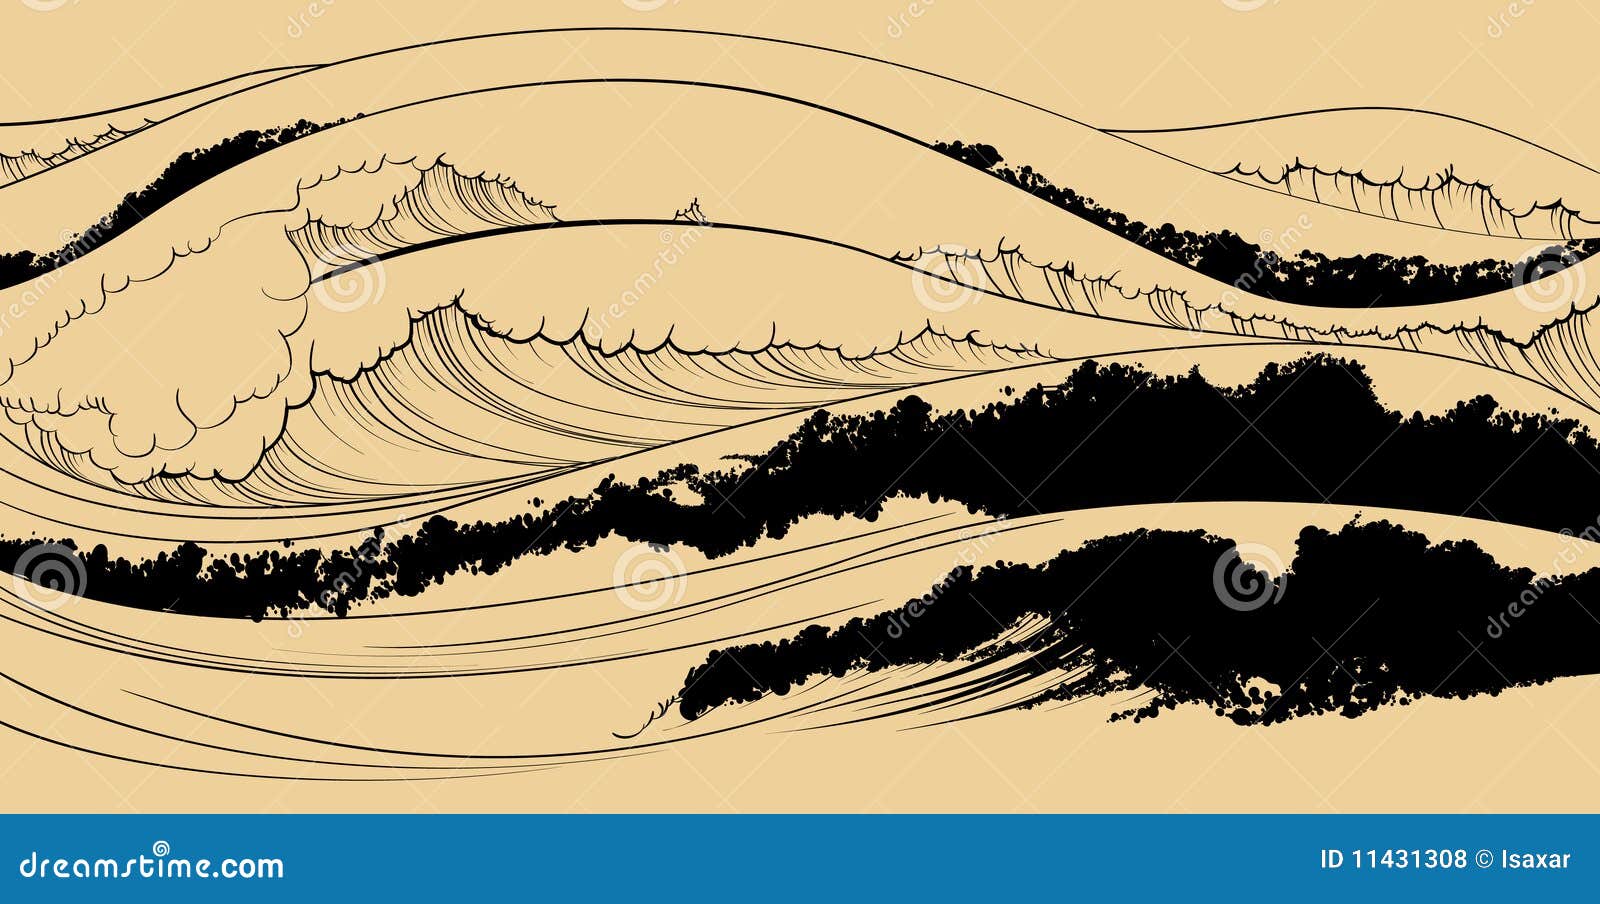 representation of the sea in japanese style